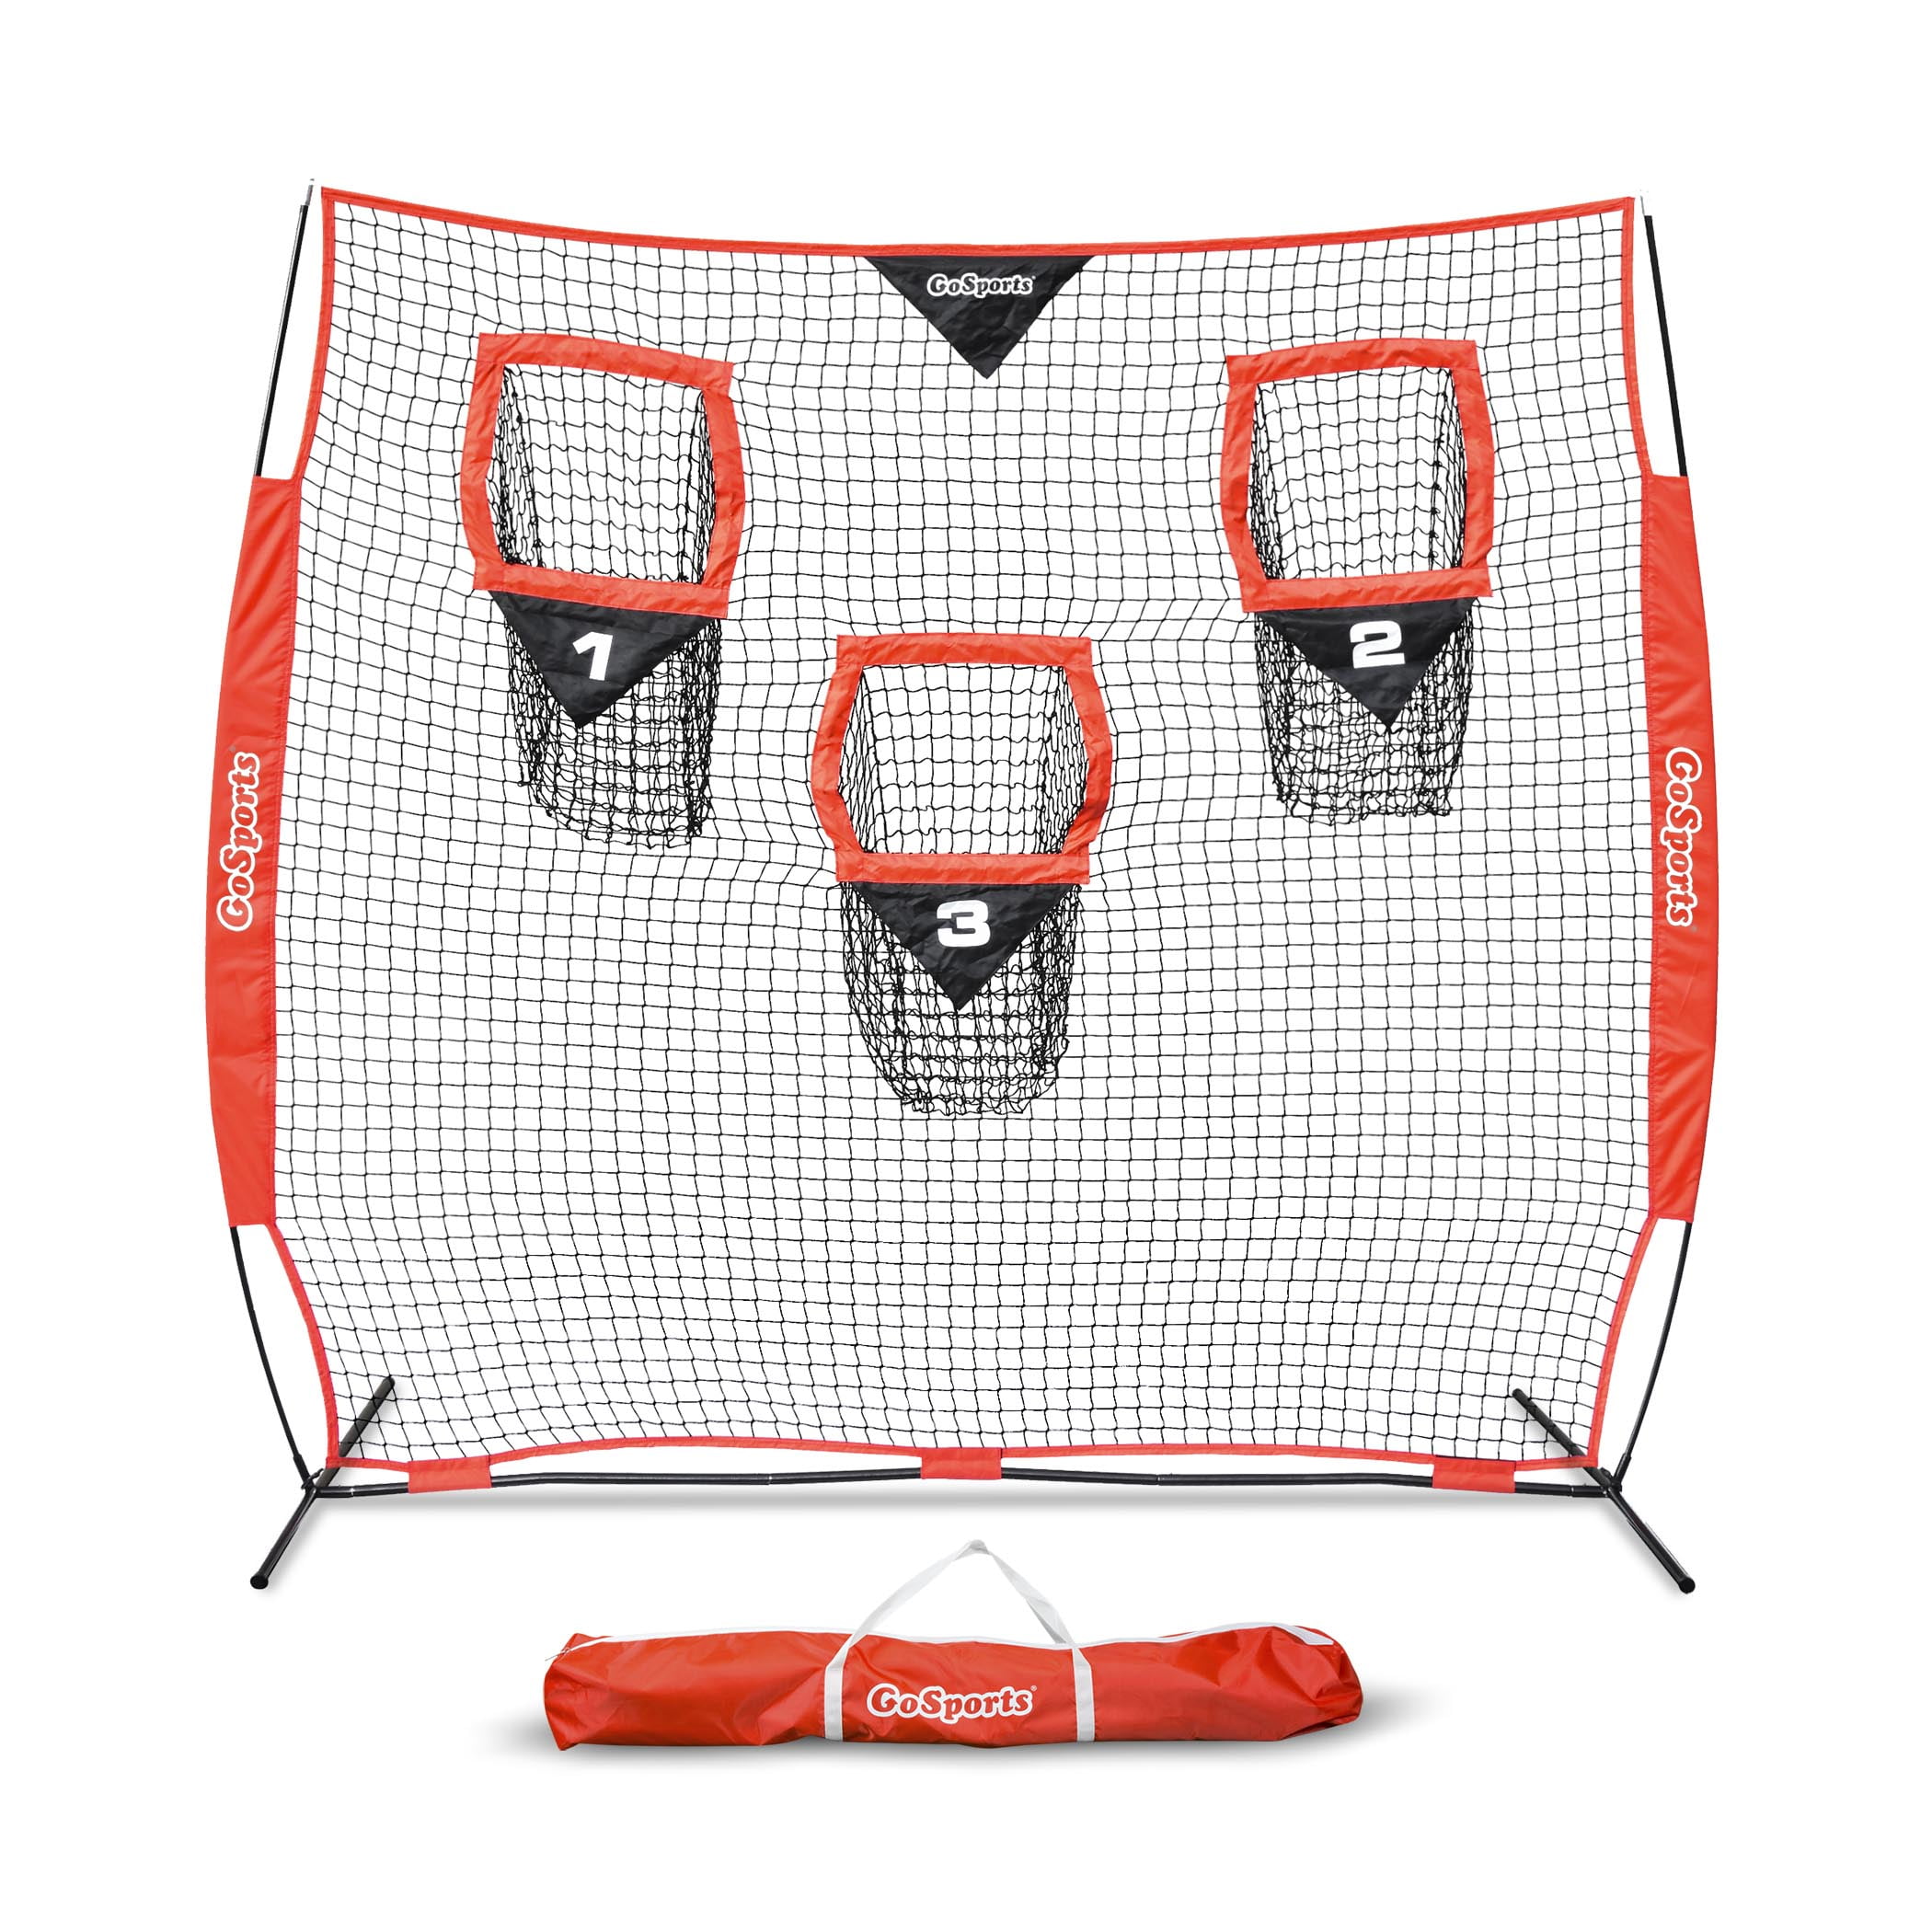 GoSports Football Trainer Throwing Net Choose Between 8' x 8' or 6' x 6' Nets Includes Foldable Bow Frame and Portable Carry Case Improve QB Throwing Accuracy 